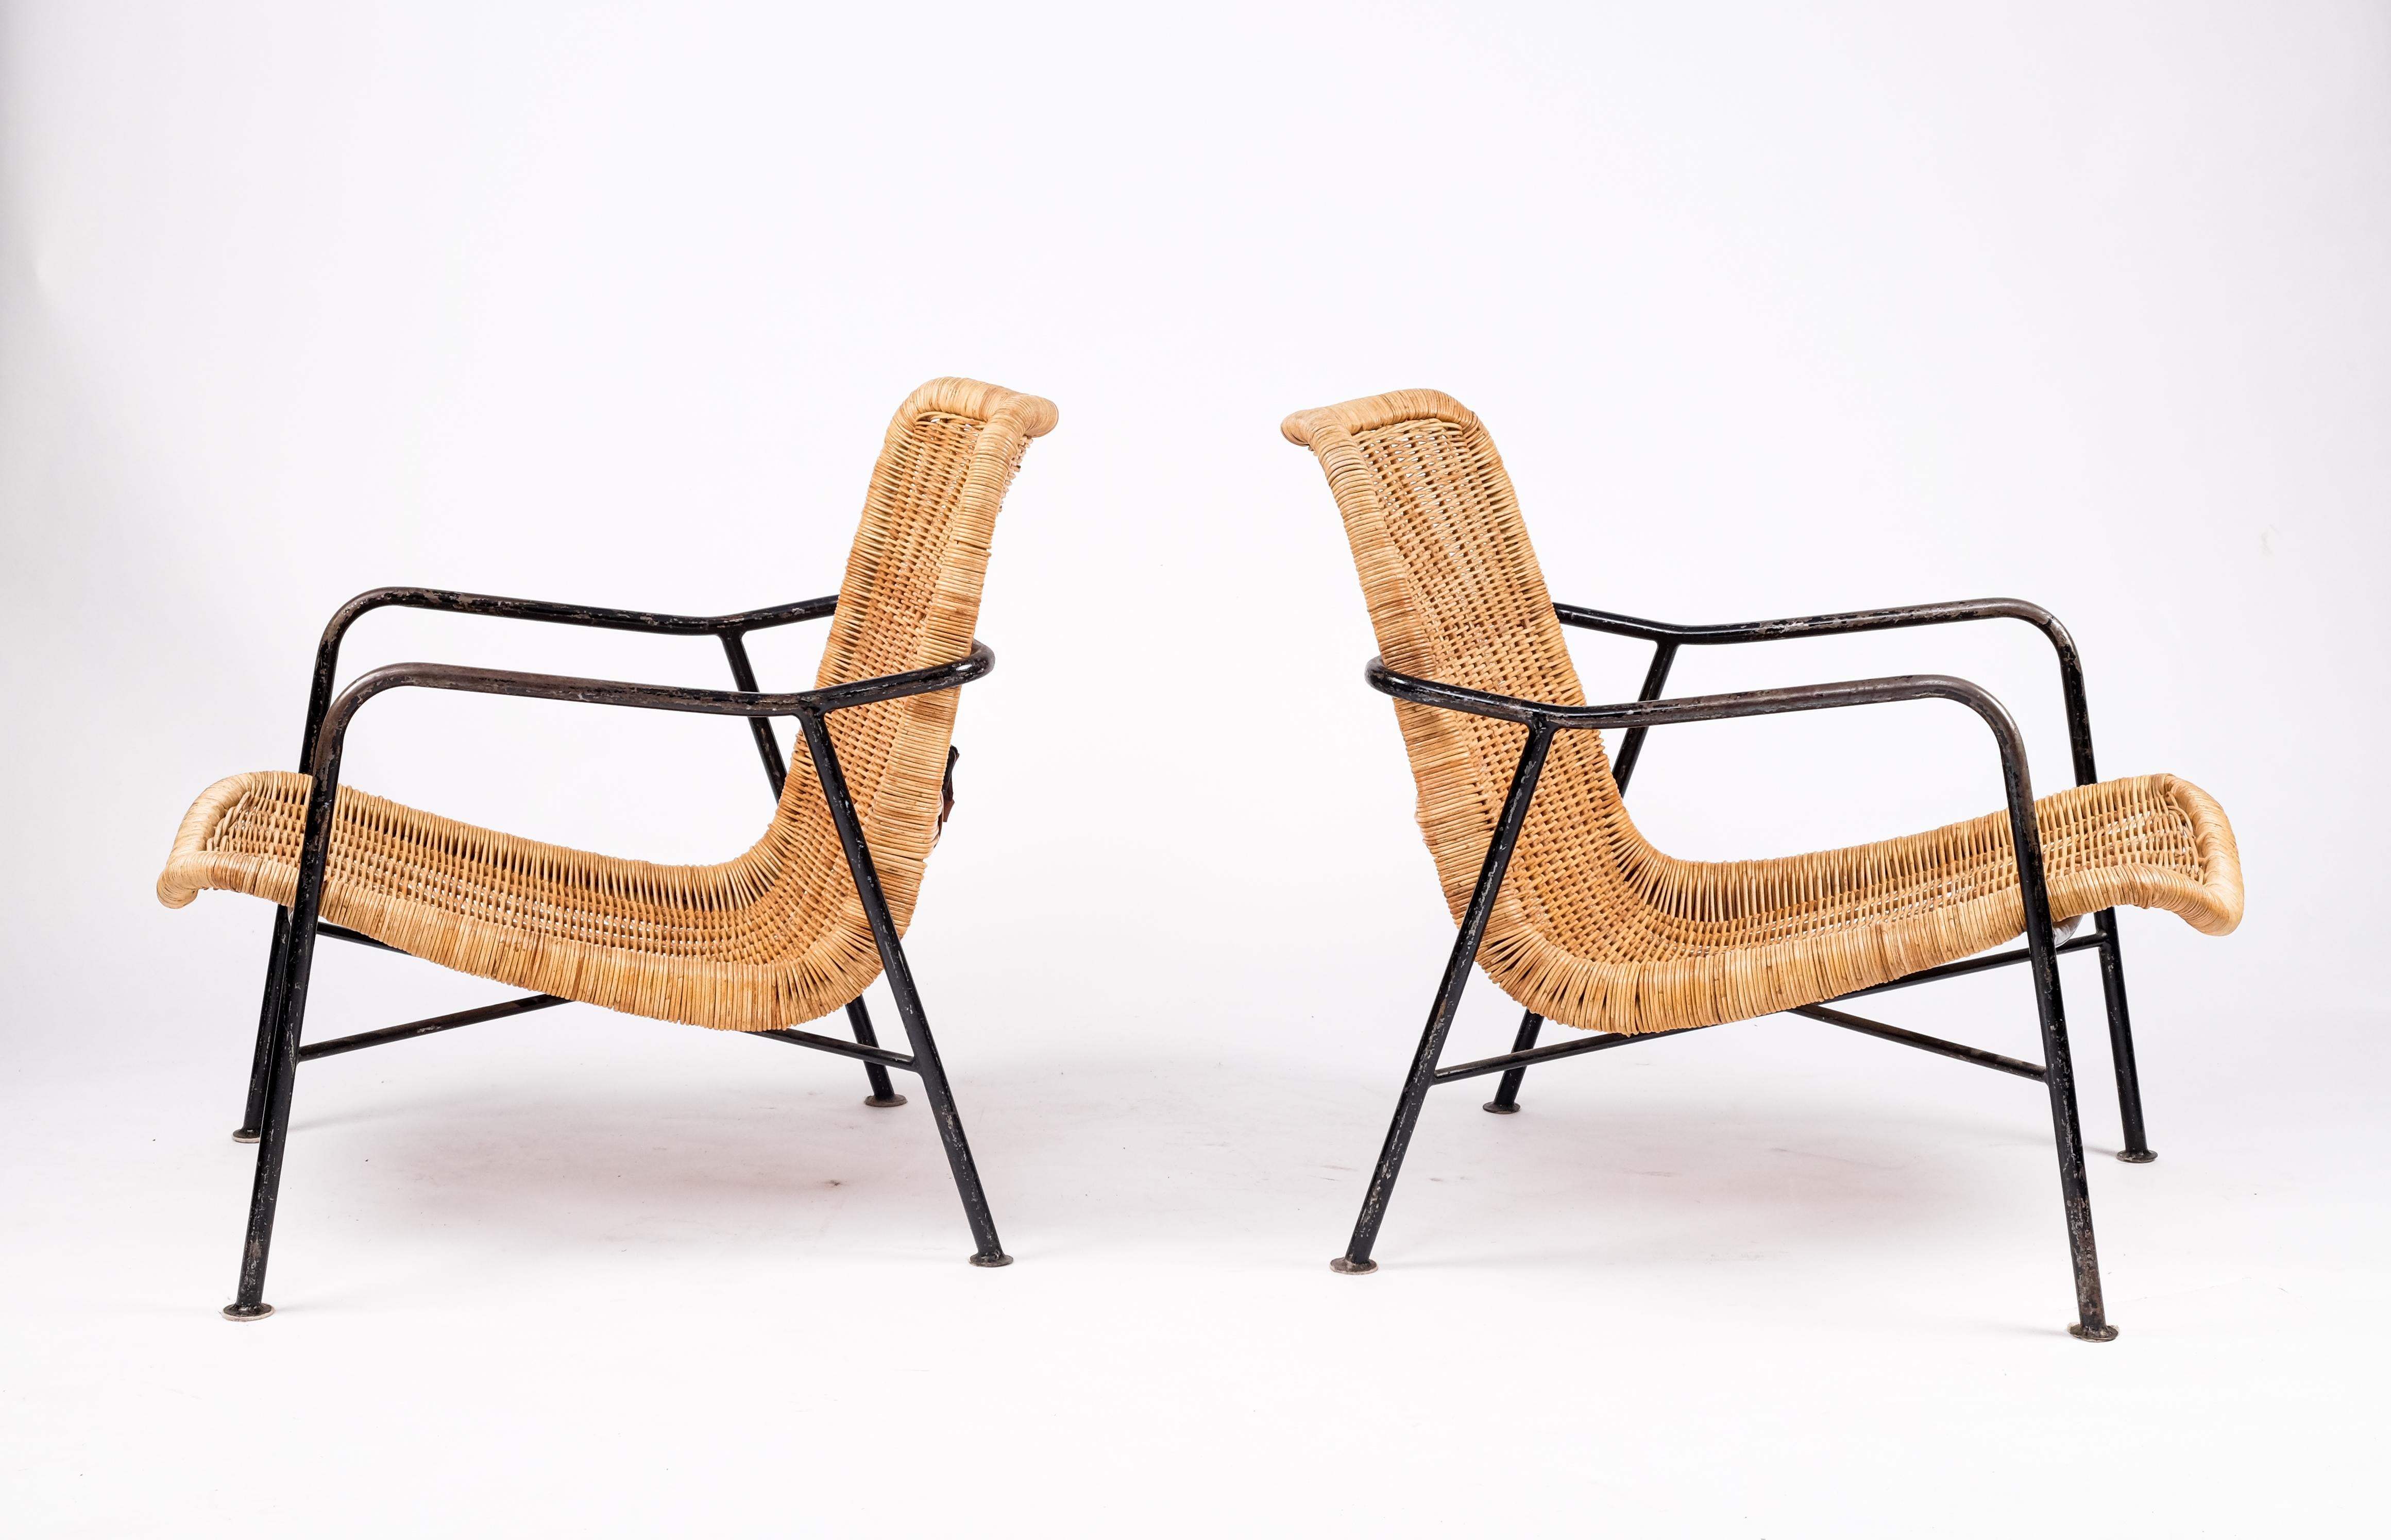 Rare Pair of Swedish Rattan Chairs, 1960s For Sale 7